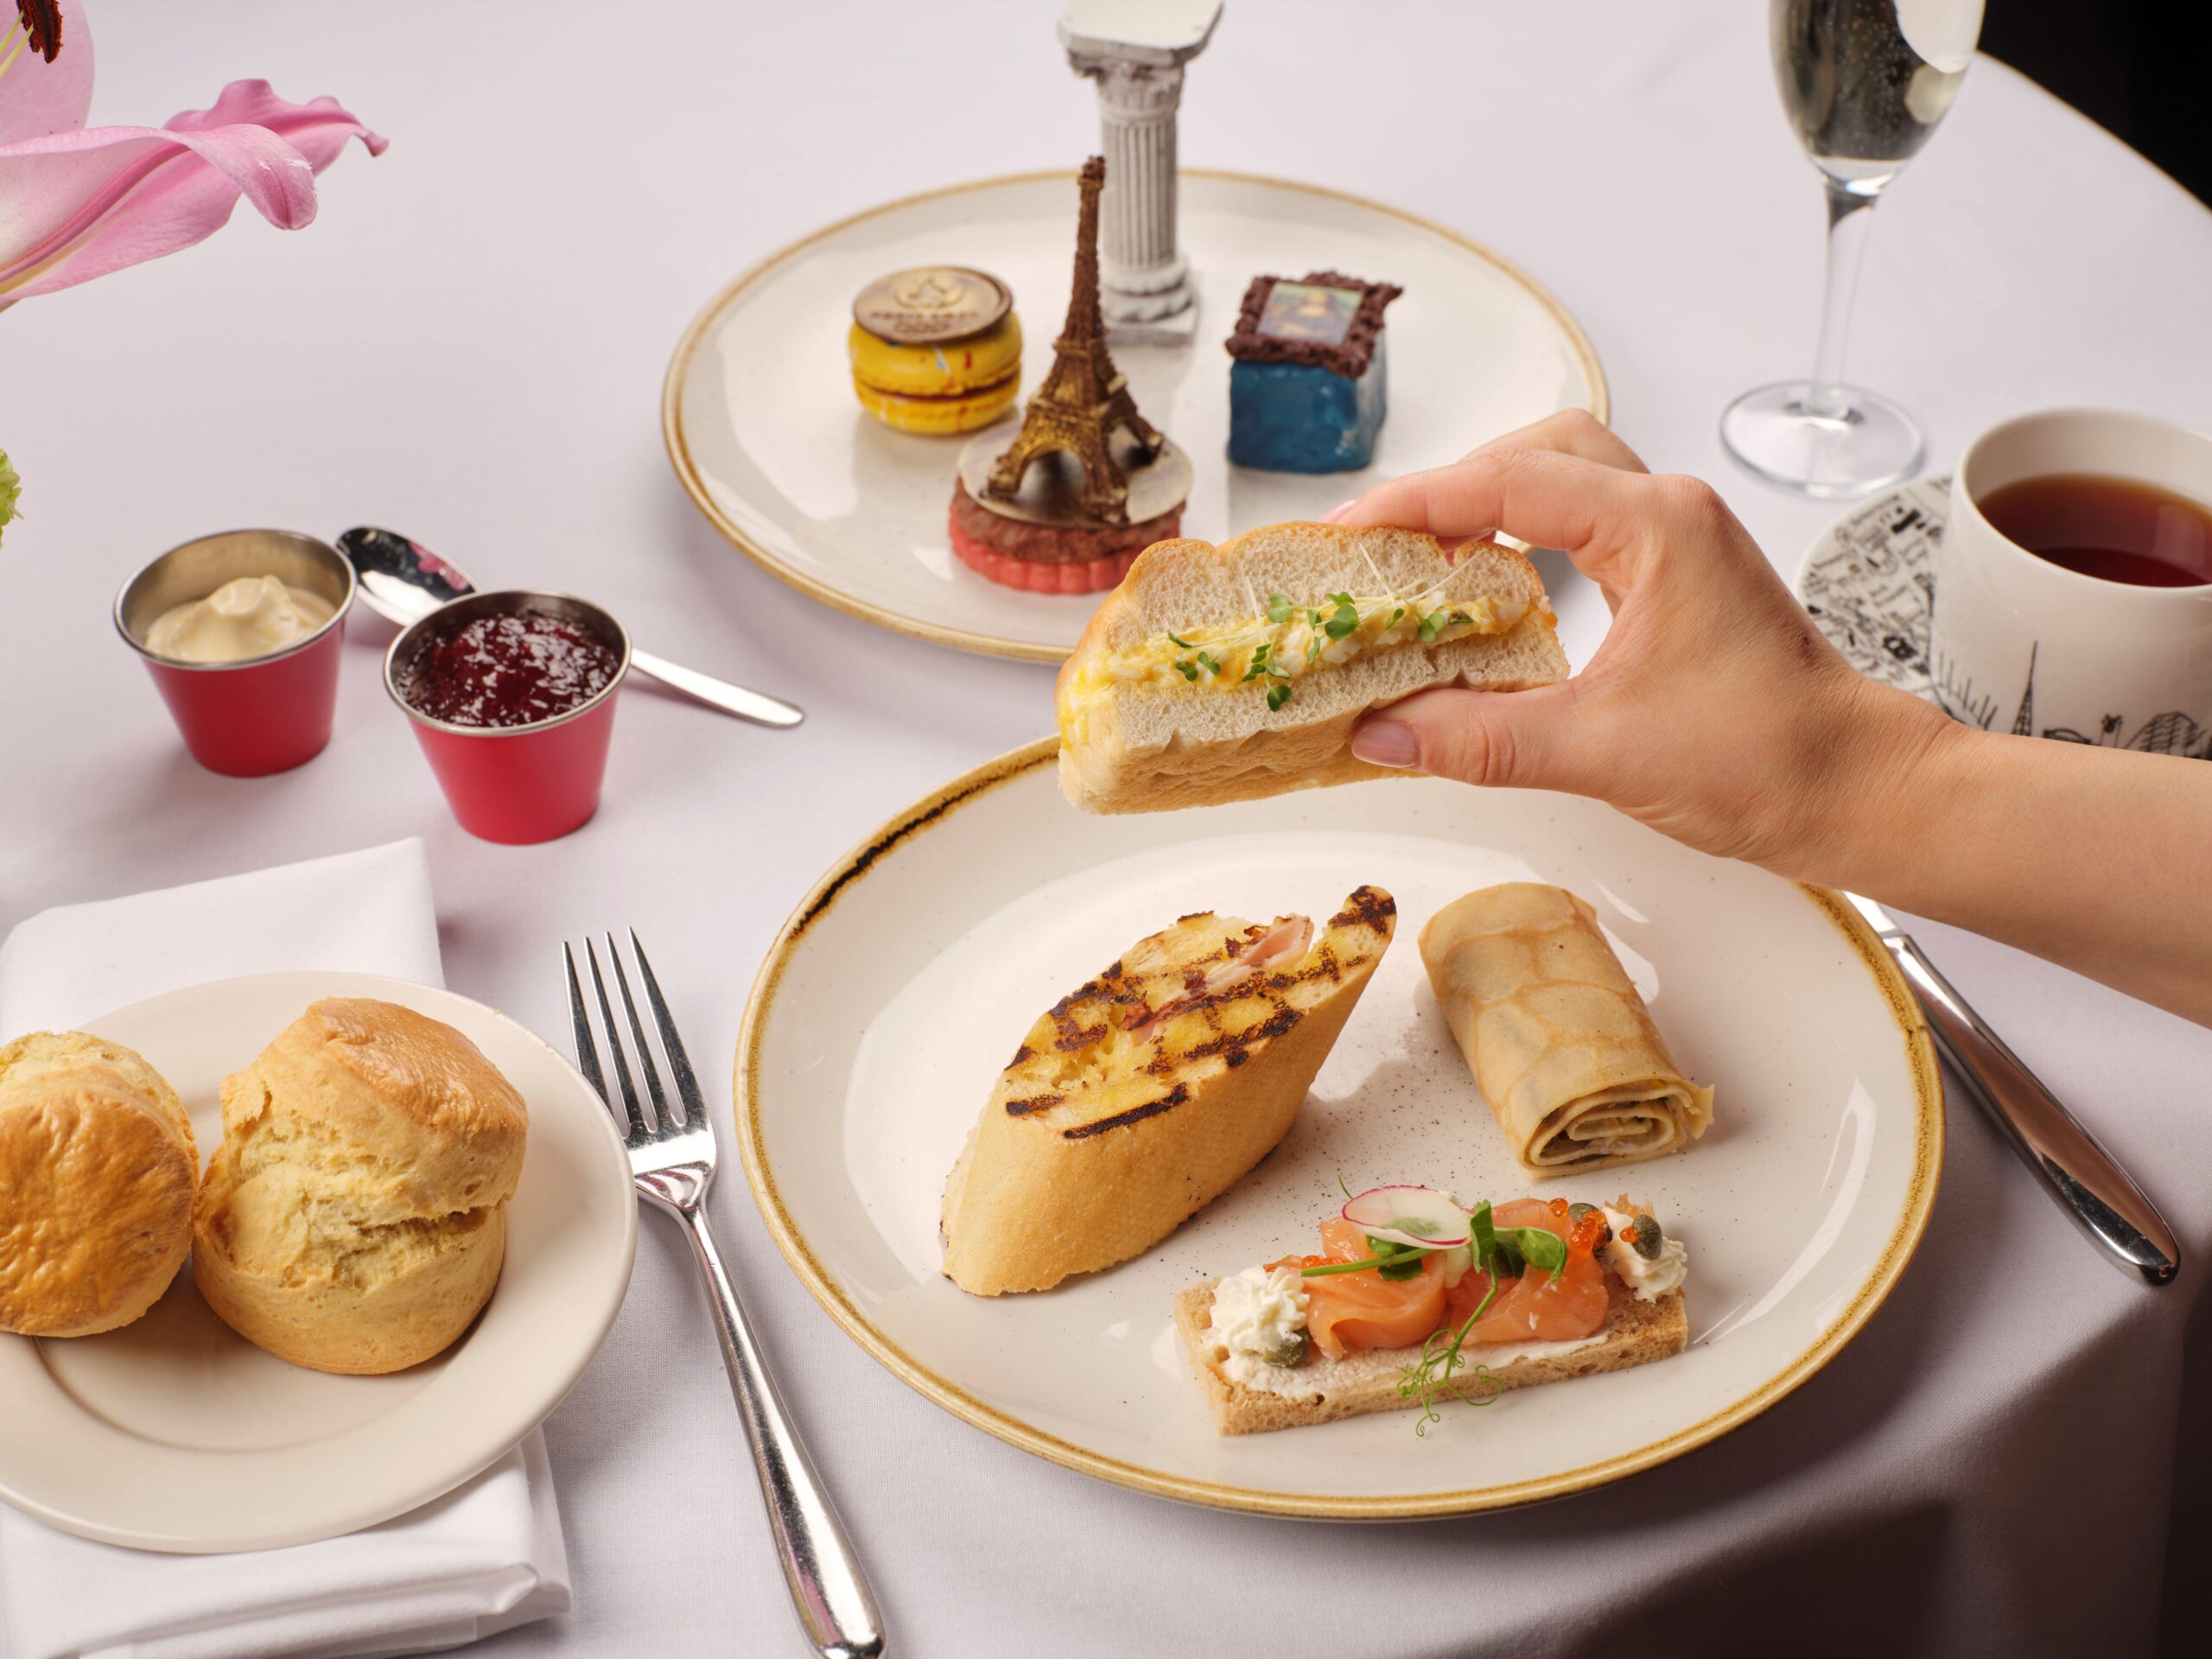 The Dilly Launches New Parisian Afternoon Tea Experience to Celebrate the 2024 Olympics